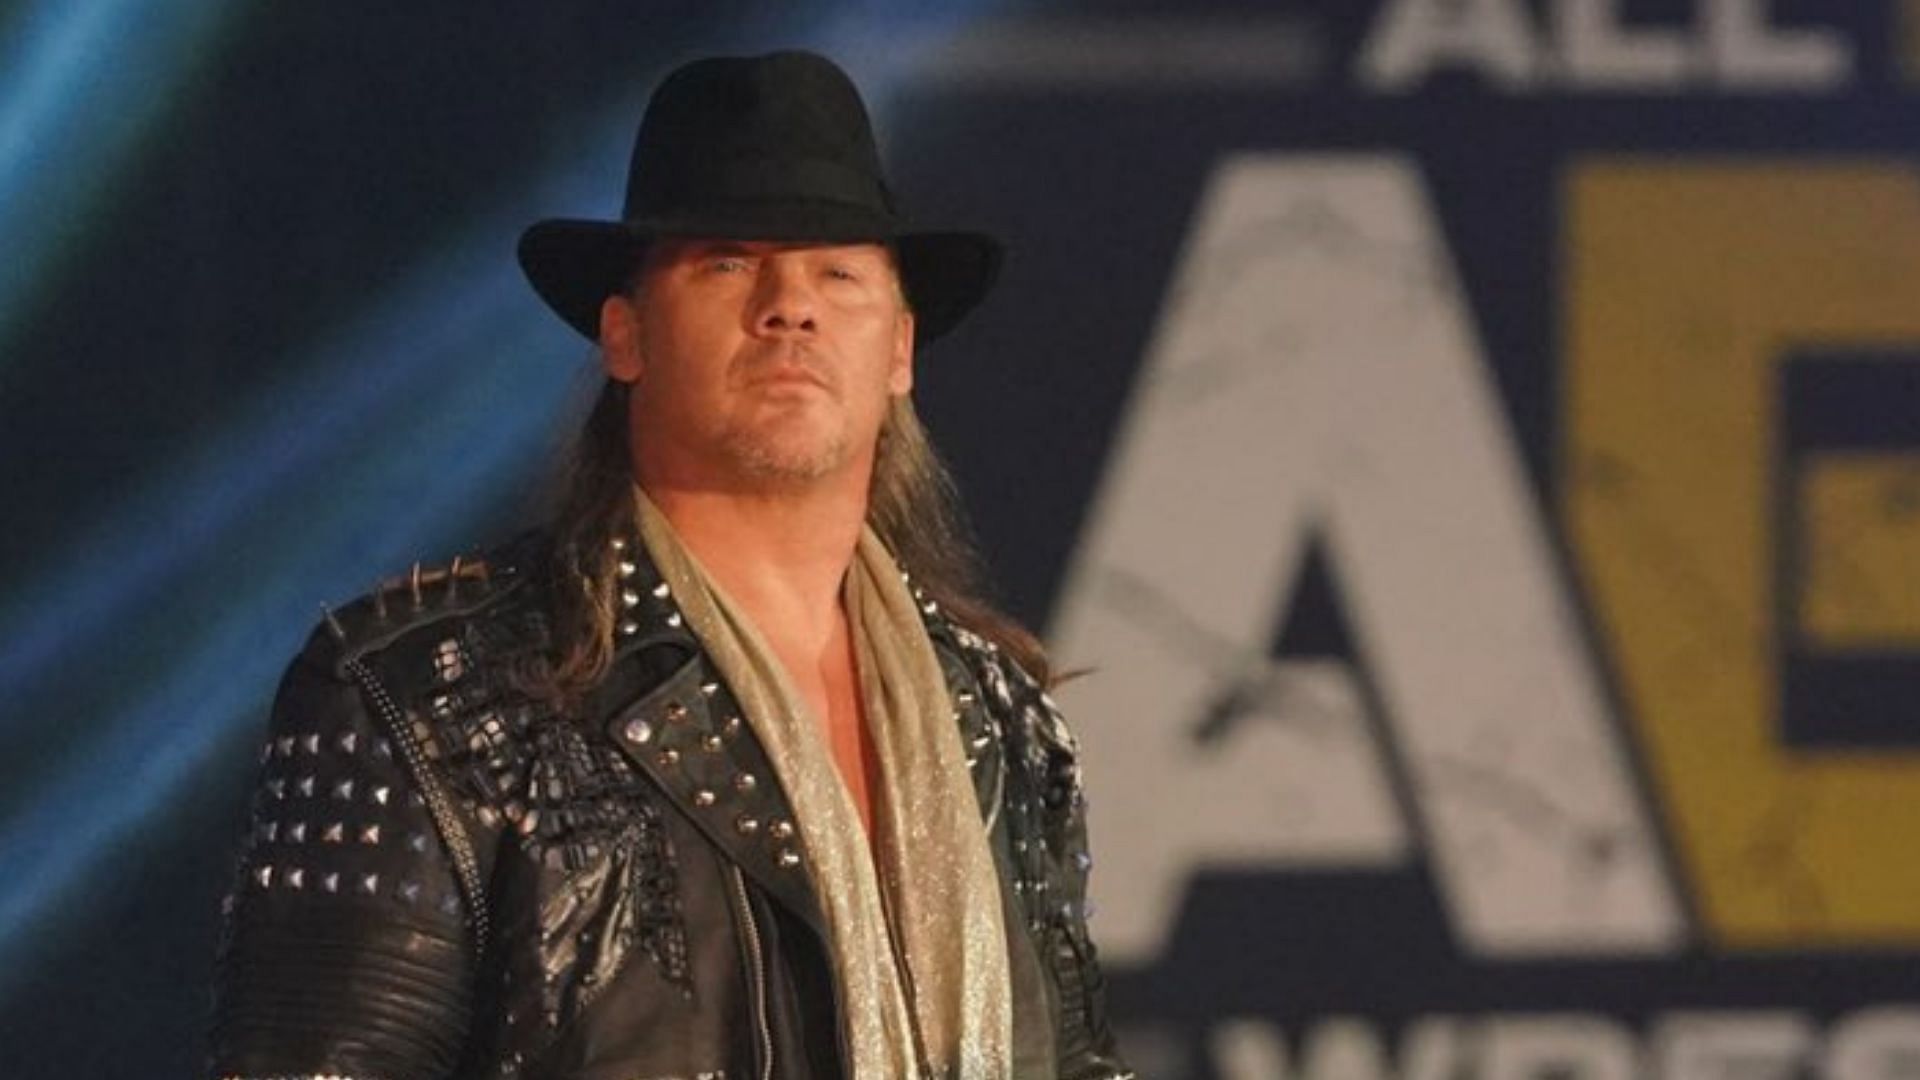 Chris Jericho making his entrance at an AEW event